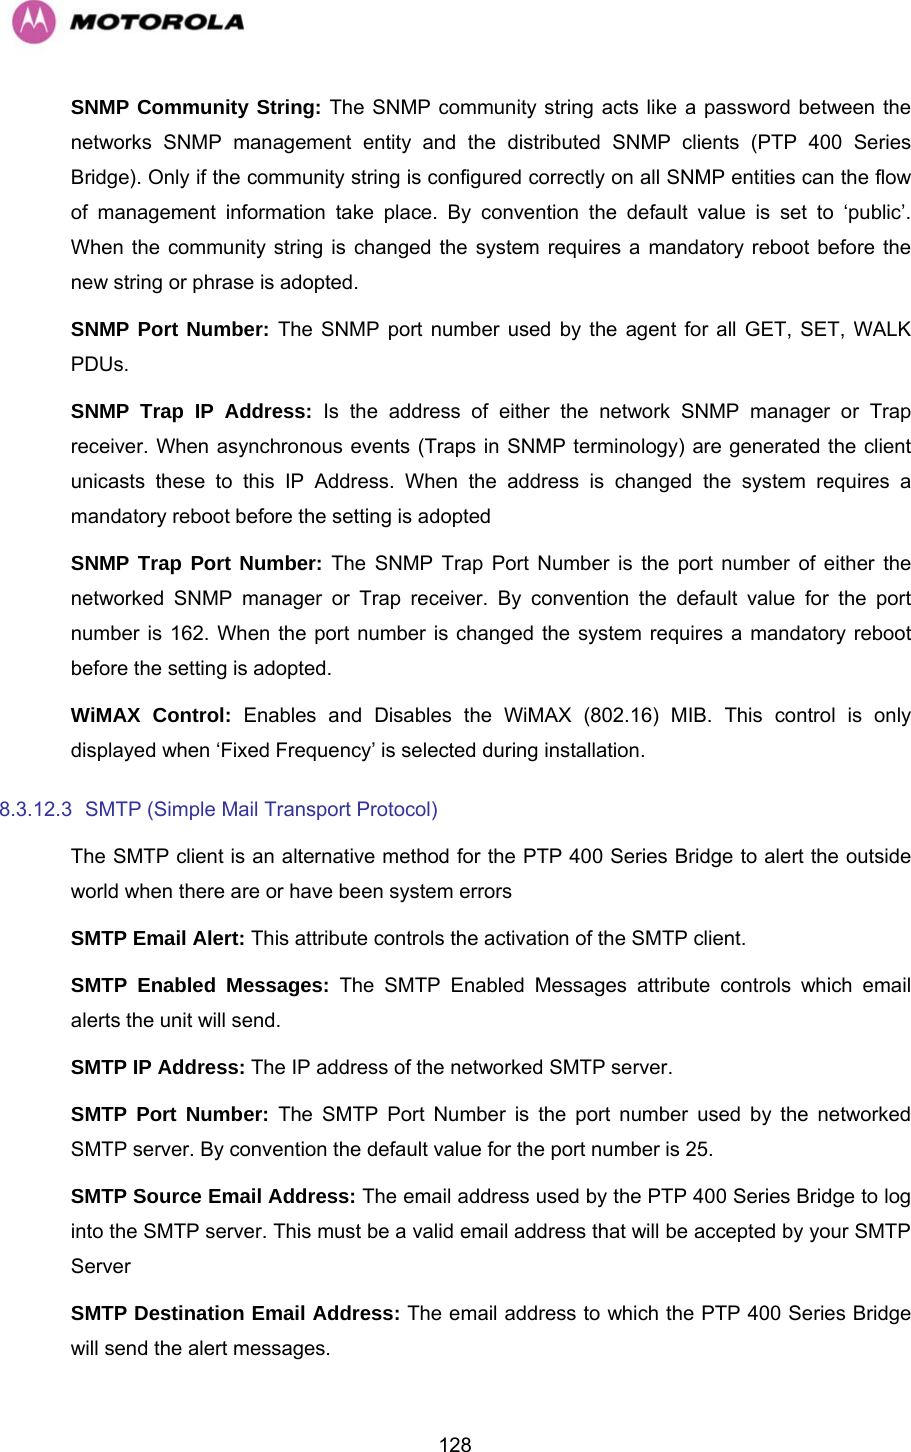   128SNMP Community String: The SNMP community string acts like a password between the networks SNMP management entity and the distributed SNMP clients (PTP 400 Series Bridge). Only if the community string is configured correctly on all SNMP entities can the flow of management information take place. By convention the default value is set to ‘public’. When the community string is changed the system requires a mandatory reboot before the new string or phrase is adopted. SNMP Port Number: The SNMP port number used by the agent for all GET, SET, WALK PDUs. SNMP Trap IP Address: Is the address of either the network SNMP manager or Trap receiver. When asynchronous events (Traps in SNMP terminology) are generated the client unicasts these to this IP Address. When the address is changed the system requires a mandatory reboot before the setting is adopted SNMP Trap Port Number: The SNMP Trap Port Number is the port number of either the networked SNMP manager or Trap receiver. By convention the default value for the port number is 162. When the port number is changed the system requires a mandatory reboot before the setting is adopted. WiMAX Control: Enables and Disables the WiMAX (802.16) MIB. This control is only displayed when ‘Fixed Frequency’ is selected during installation. 8.3.12.3  SMTP (Simple Mail Transport Protocol)  The SMTP client is an alternative method for the PTP 400 Series Bridge to alert the outside world when there are or have been system errors SMTP Email Alert: This attribute controls the activation of the SMTP client. SMTP Enabled Messages: The SMTP Enabled Messages attribute controls which email alerts the unit will send. SMTP IP Address: The IP address of the networked SMTP server. SMTP Port Number: The SMTP Port Number is the port number used by the networked SMTP server. By convention the default value for the port number is 25. SMTP Source Email Address: The email address used by the PTP 400 Series Bridge to log into the SMTP server. This must be a valid email address that will be accepted by your SMTP Server SMTP Destination Email Address: The email address to which the PTP 400 Series Bridge will send the alert messages. 